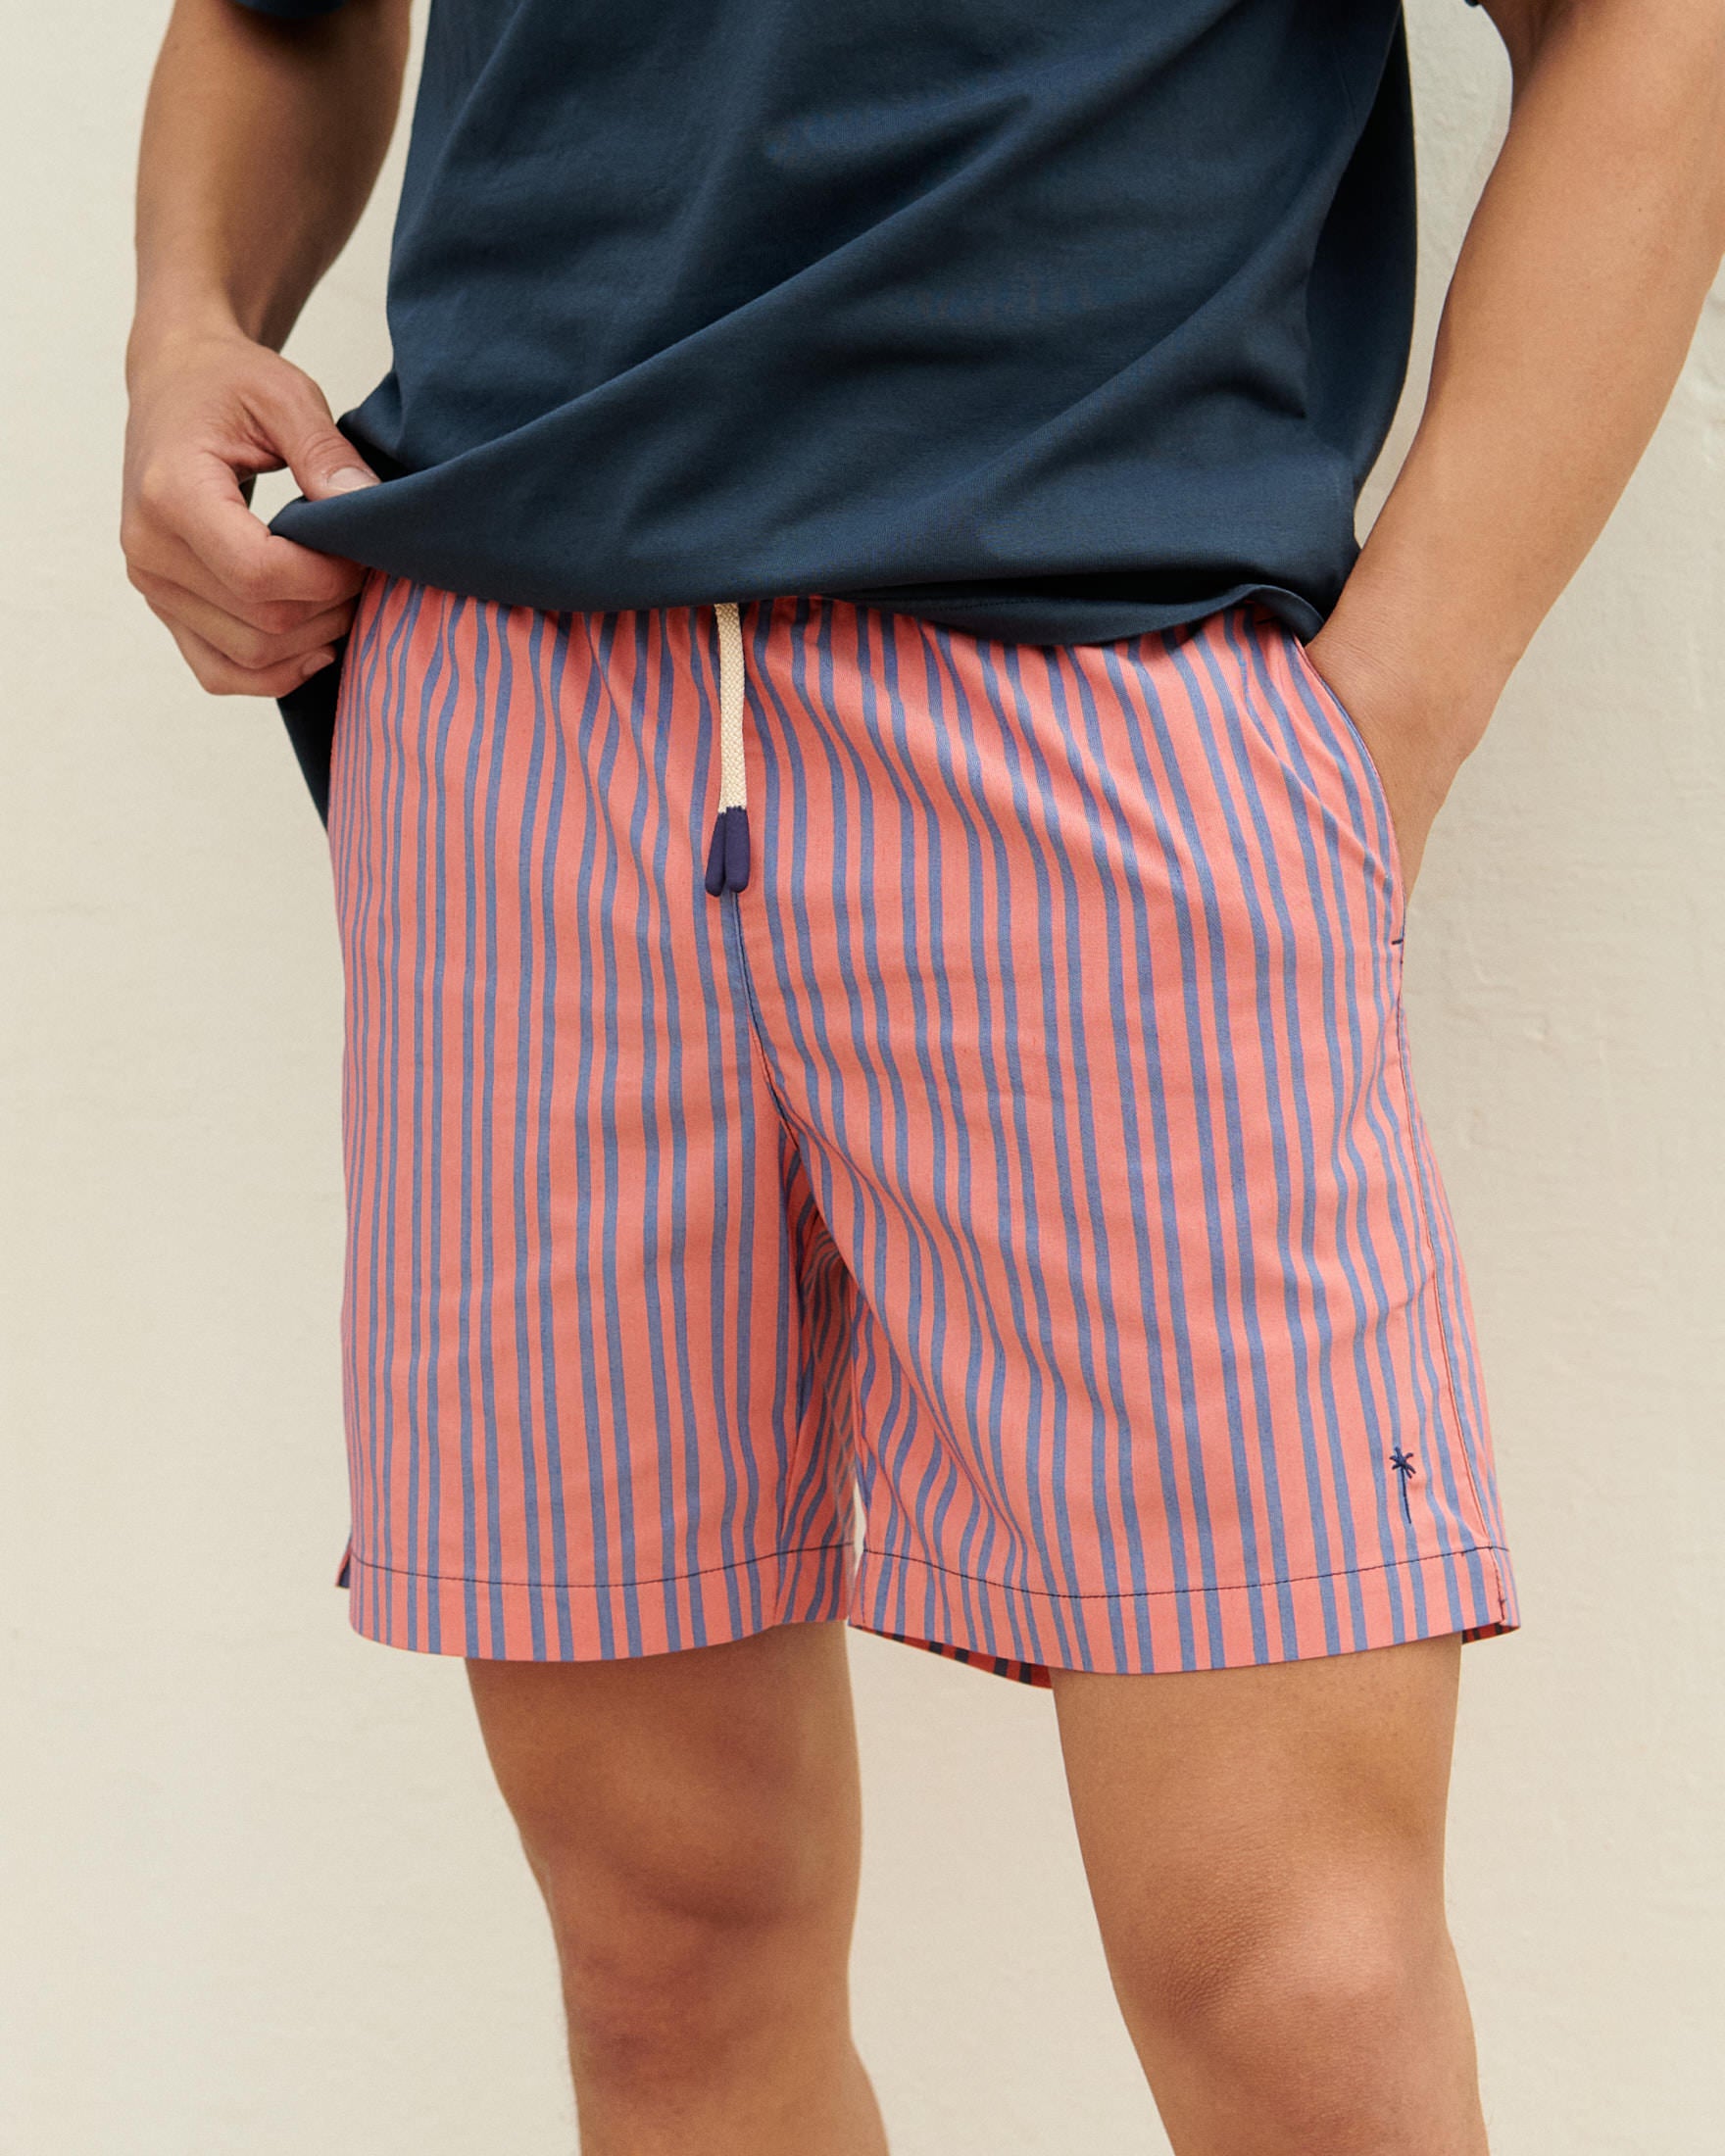 Printed Swim Shorts - With Stripes - Red And Navy Blue